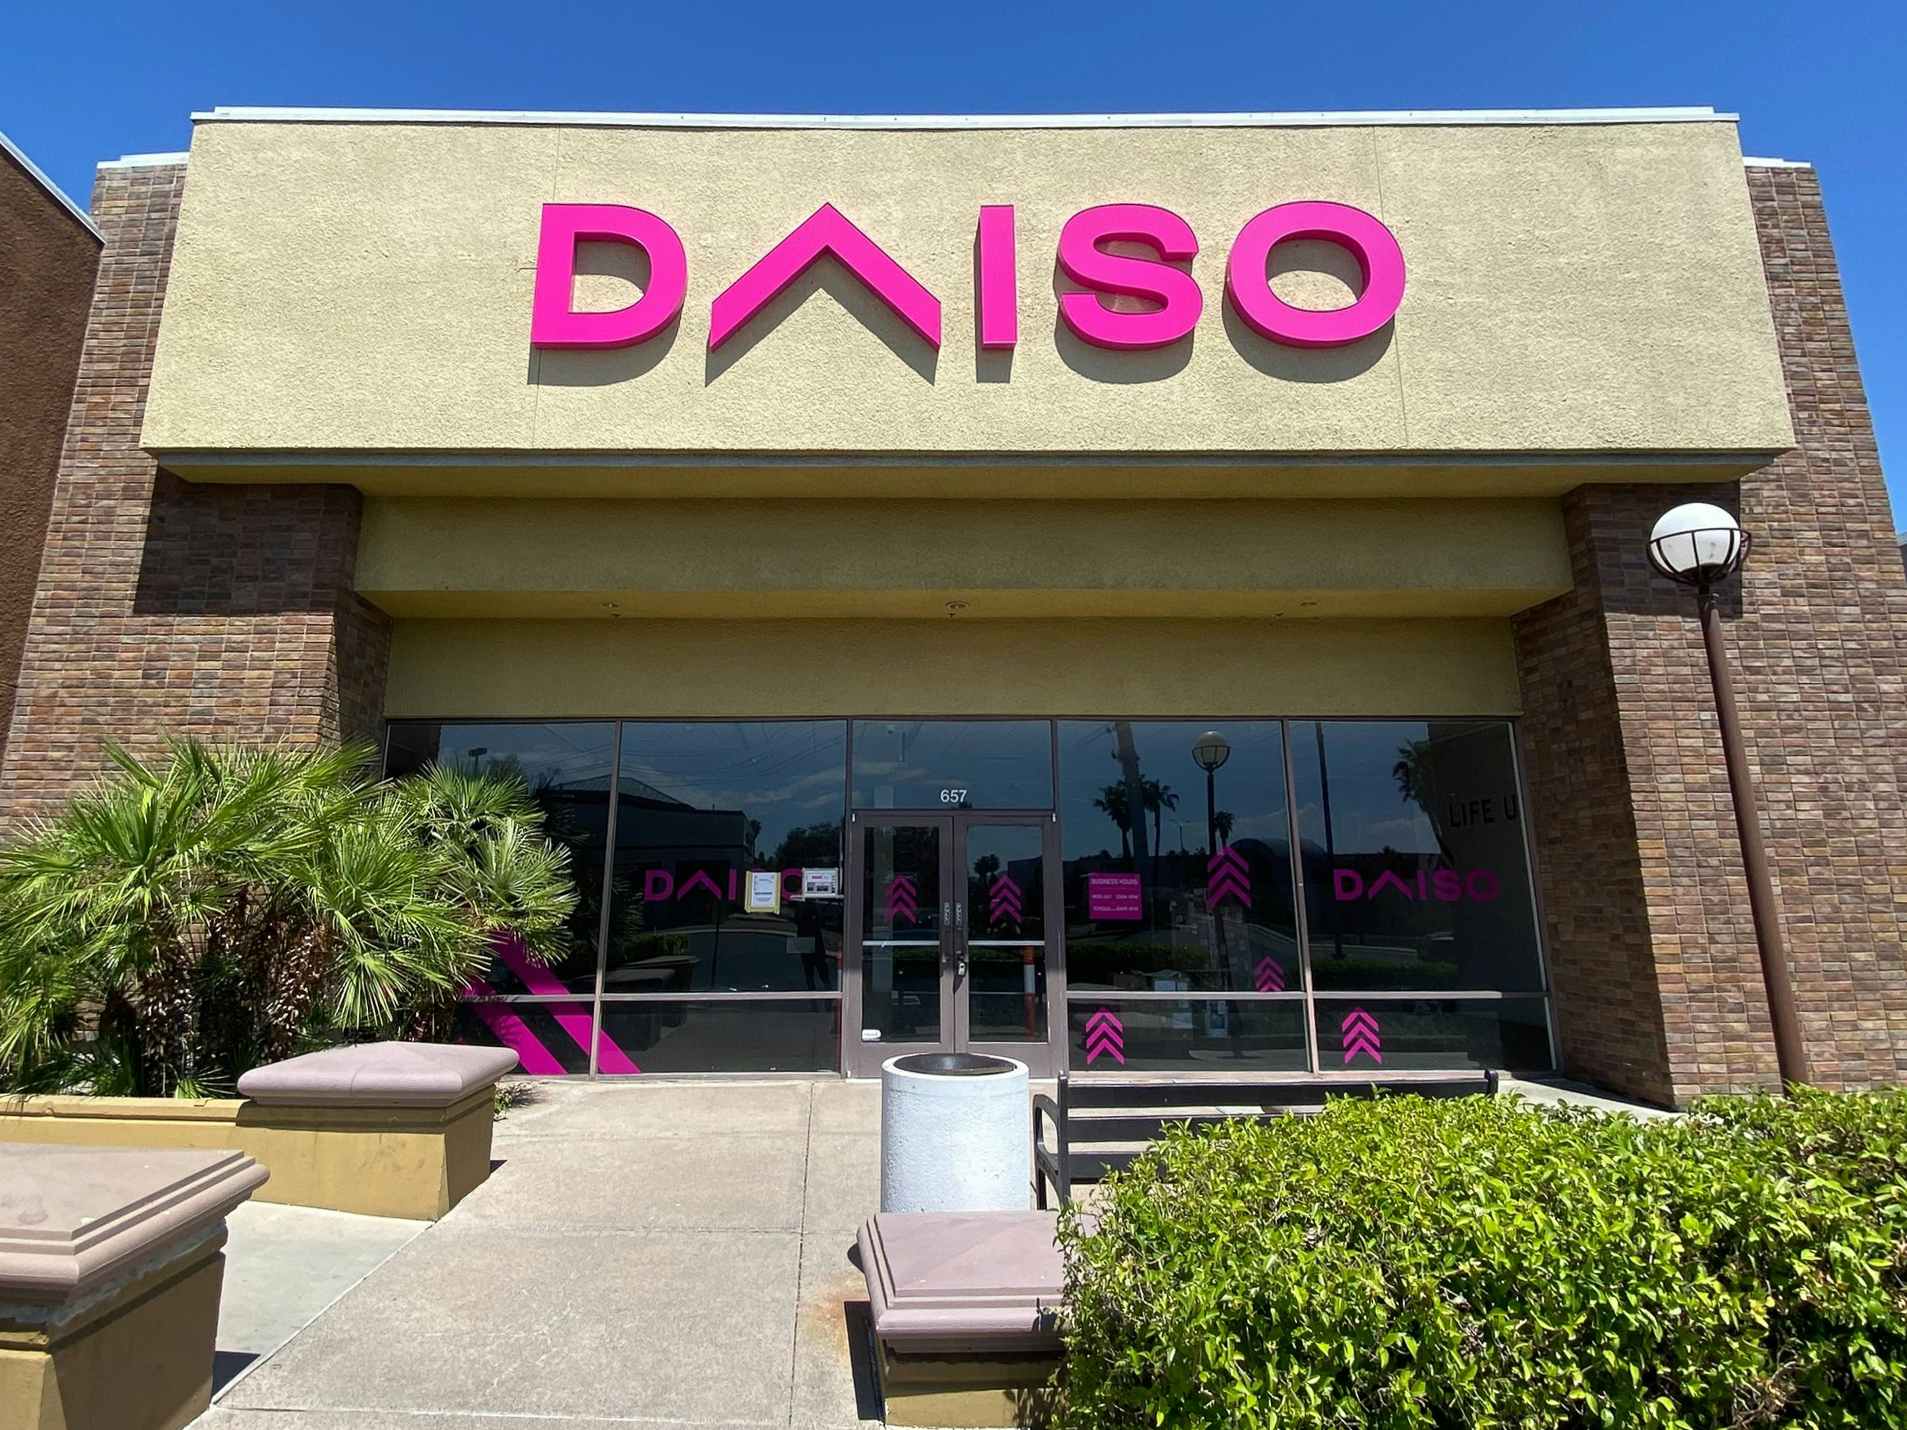 A Daiso store front in a shopping center